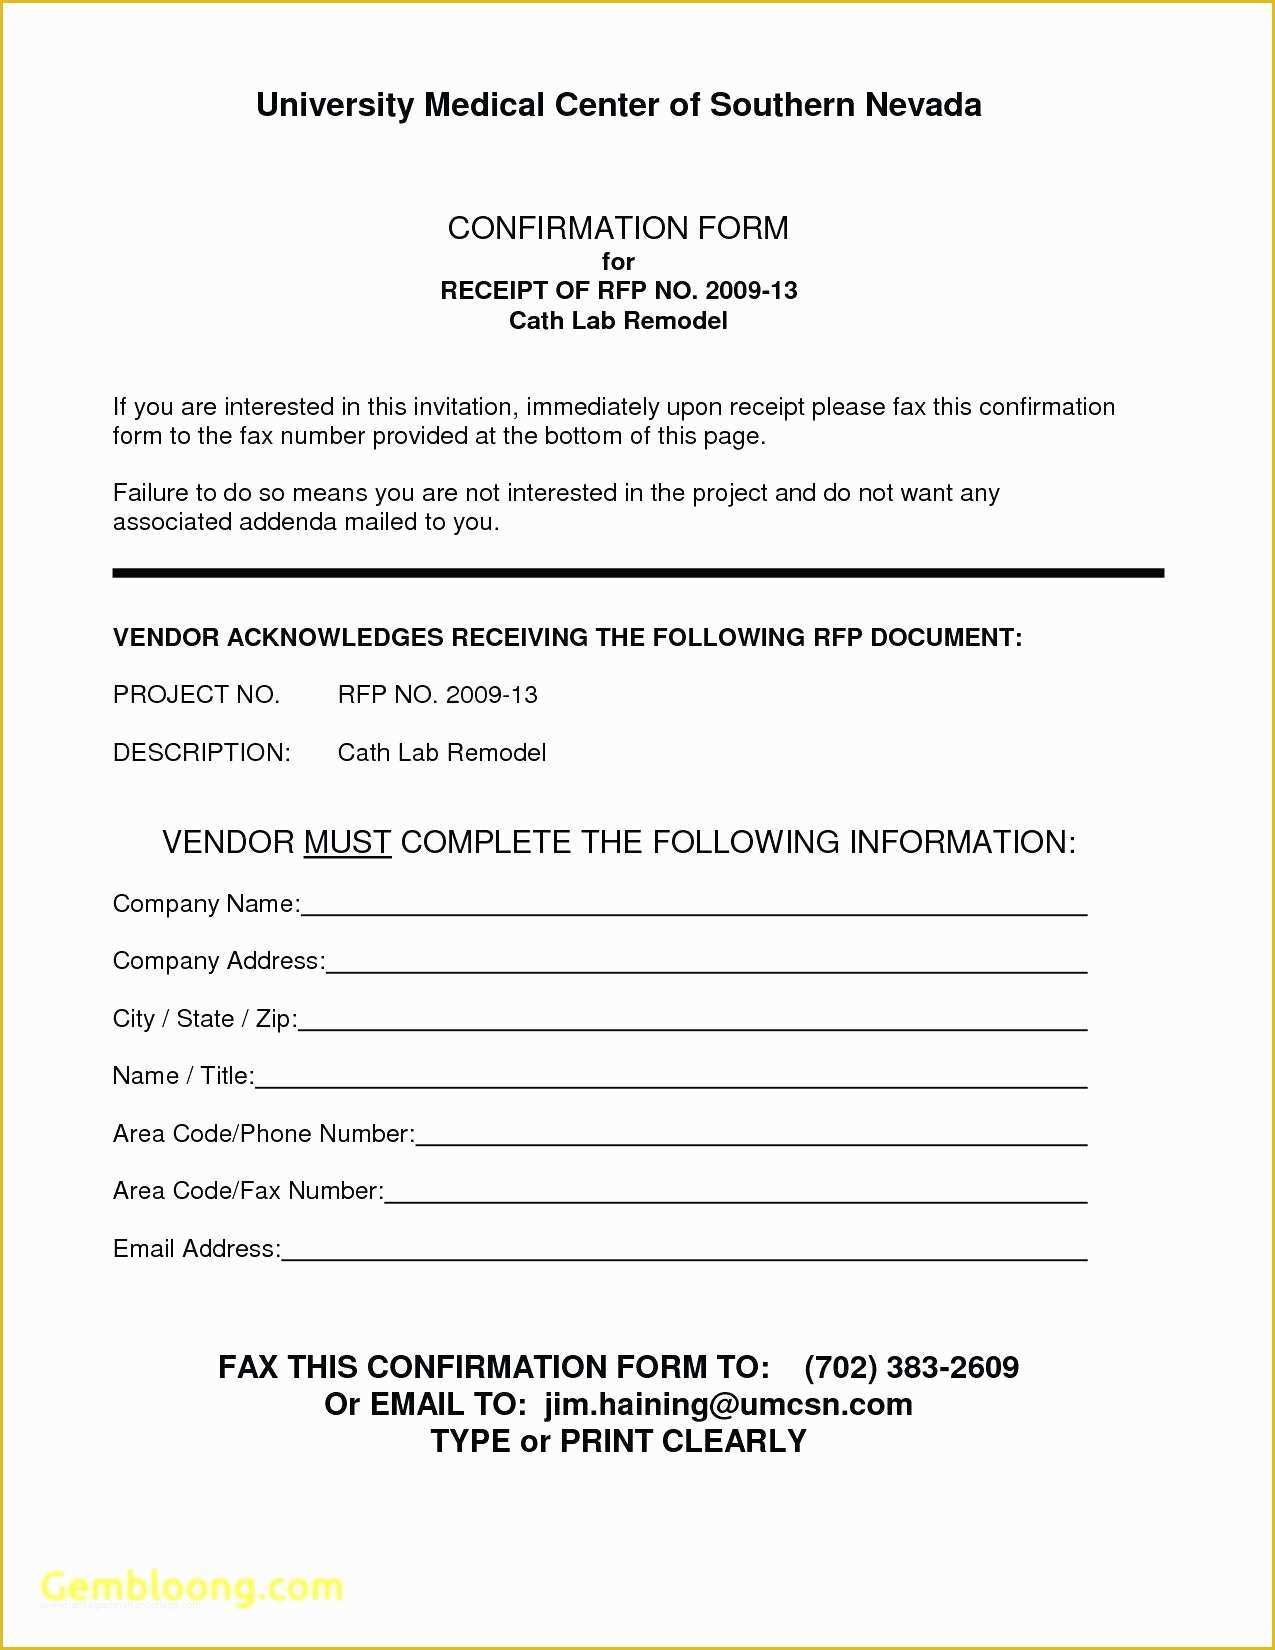 Free Contractor Agreement Template Of Template Contracting Contract Template